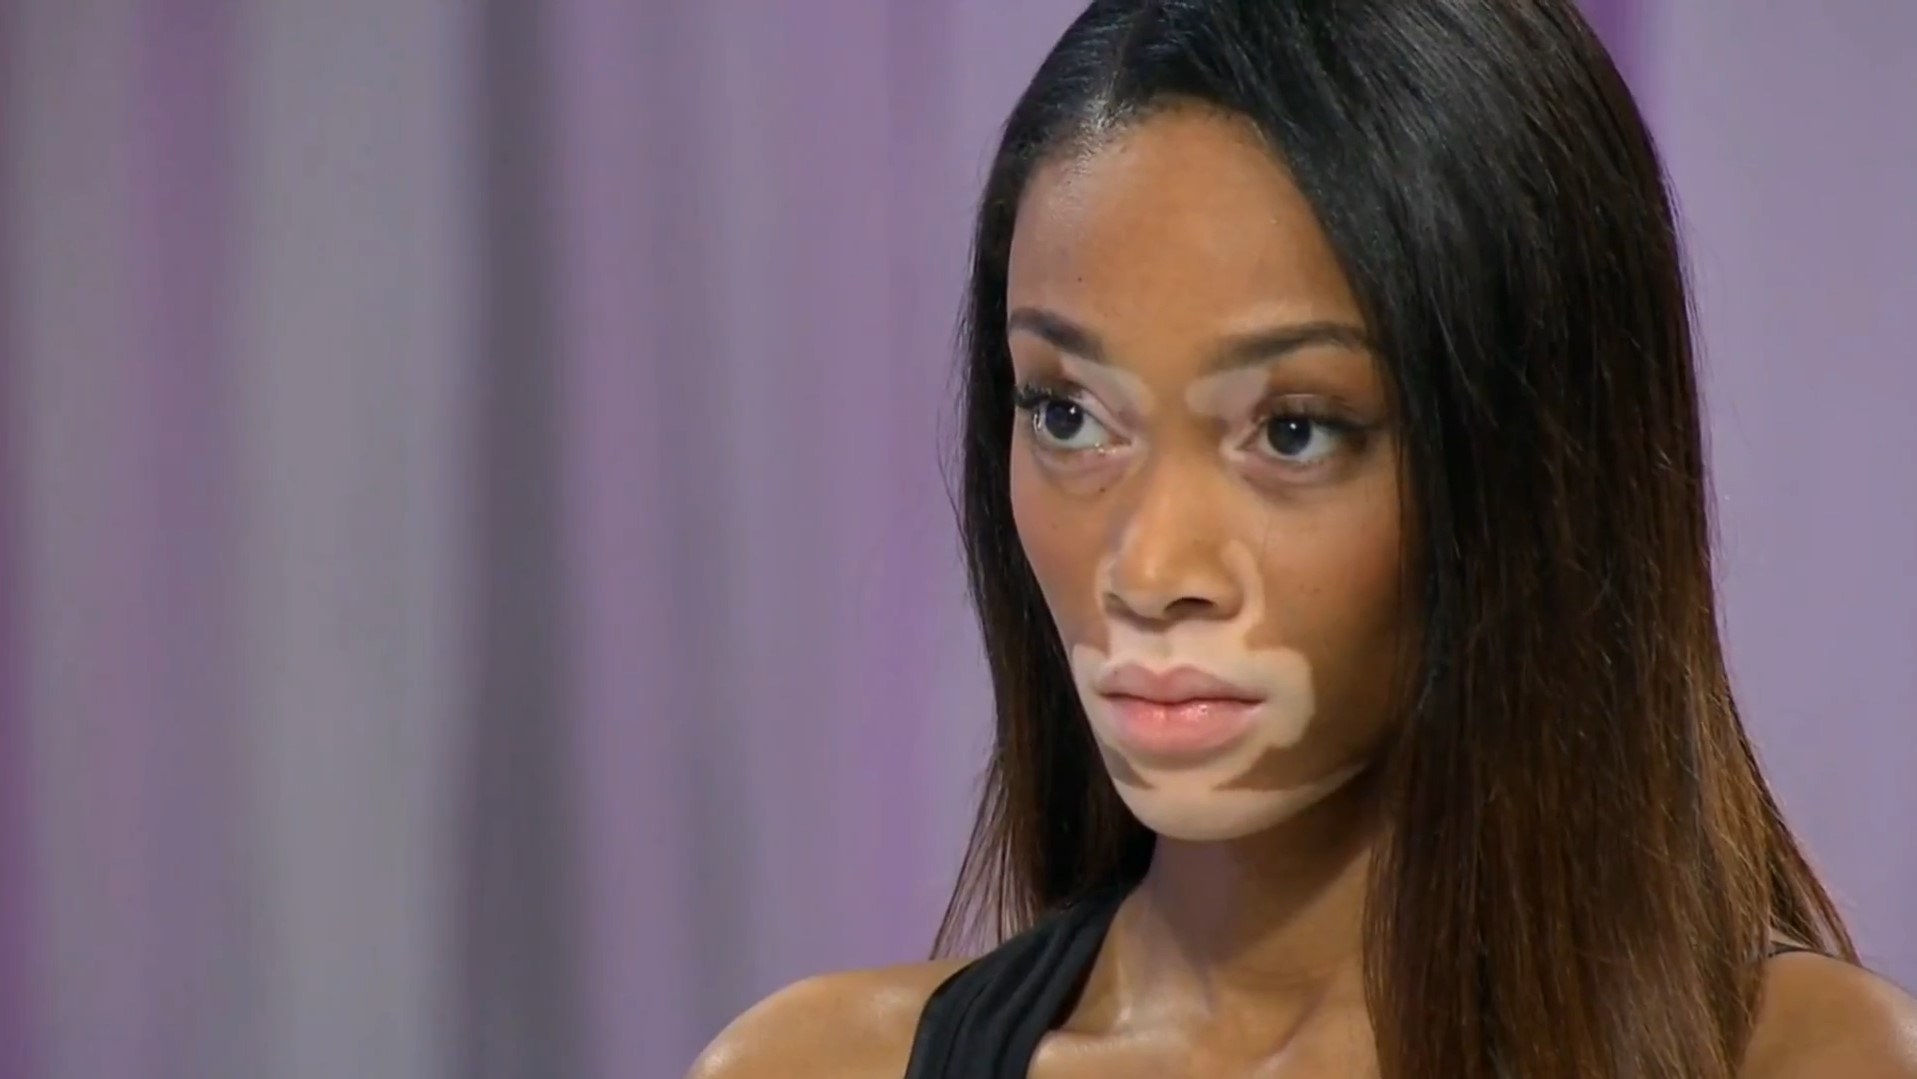 America's Next Top Model' Winners: Where Are They Now?